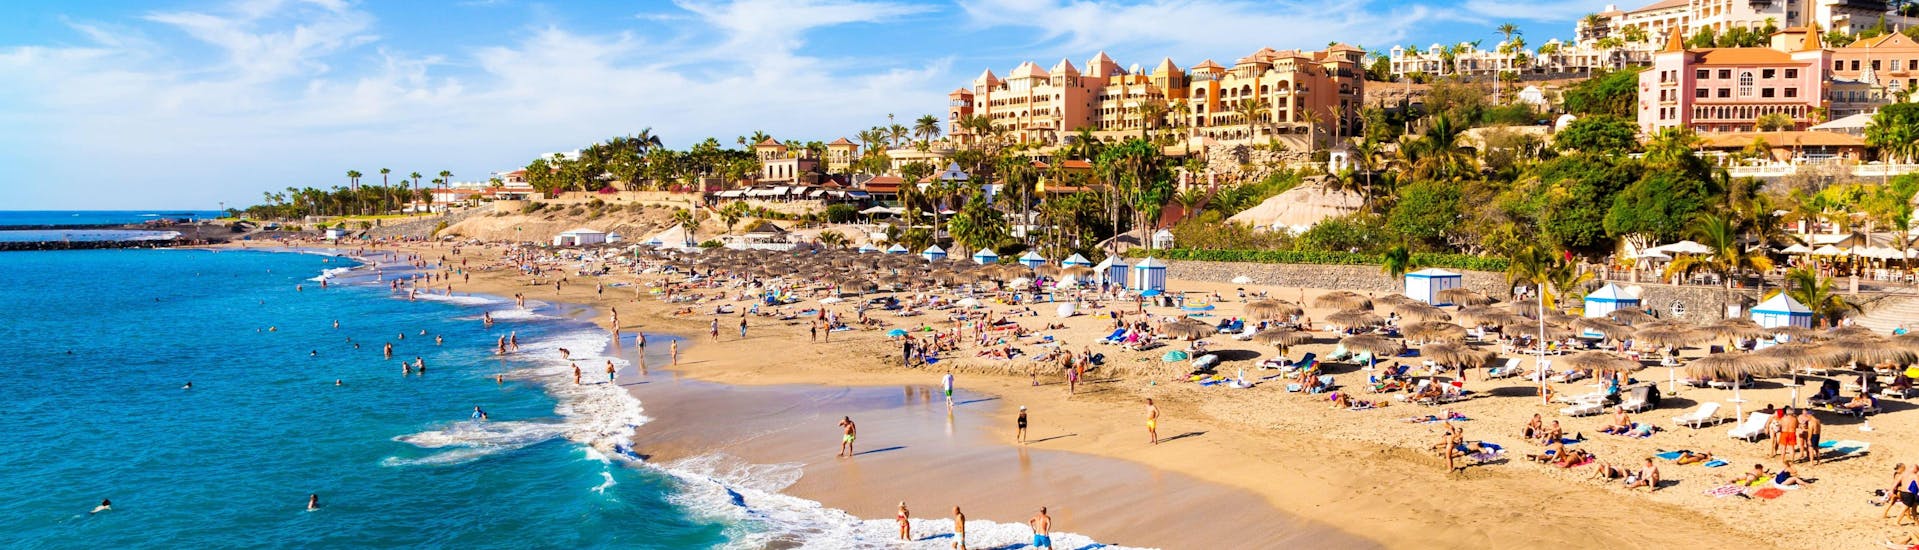 A beach in Costa Adeje, a great starting point for boat trips in Tenerife.